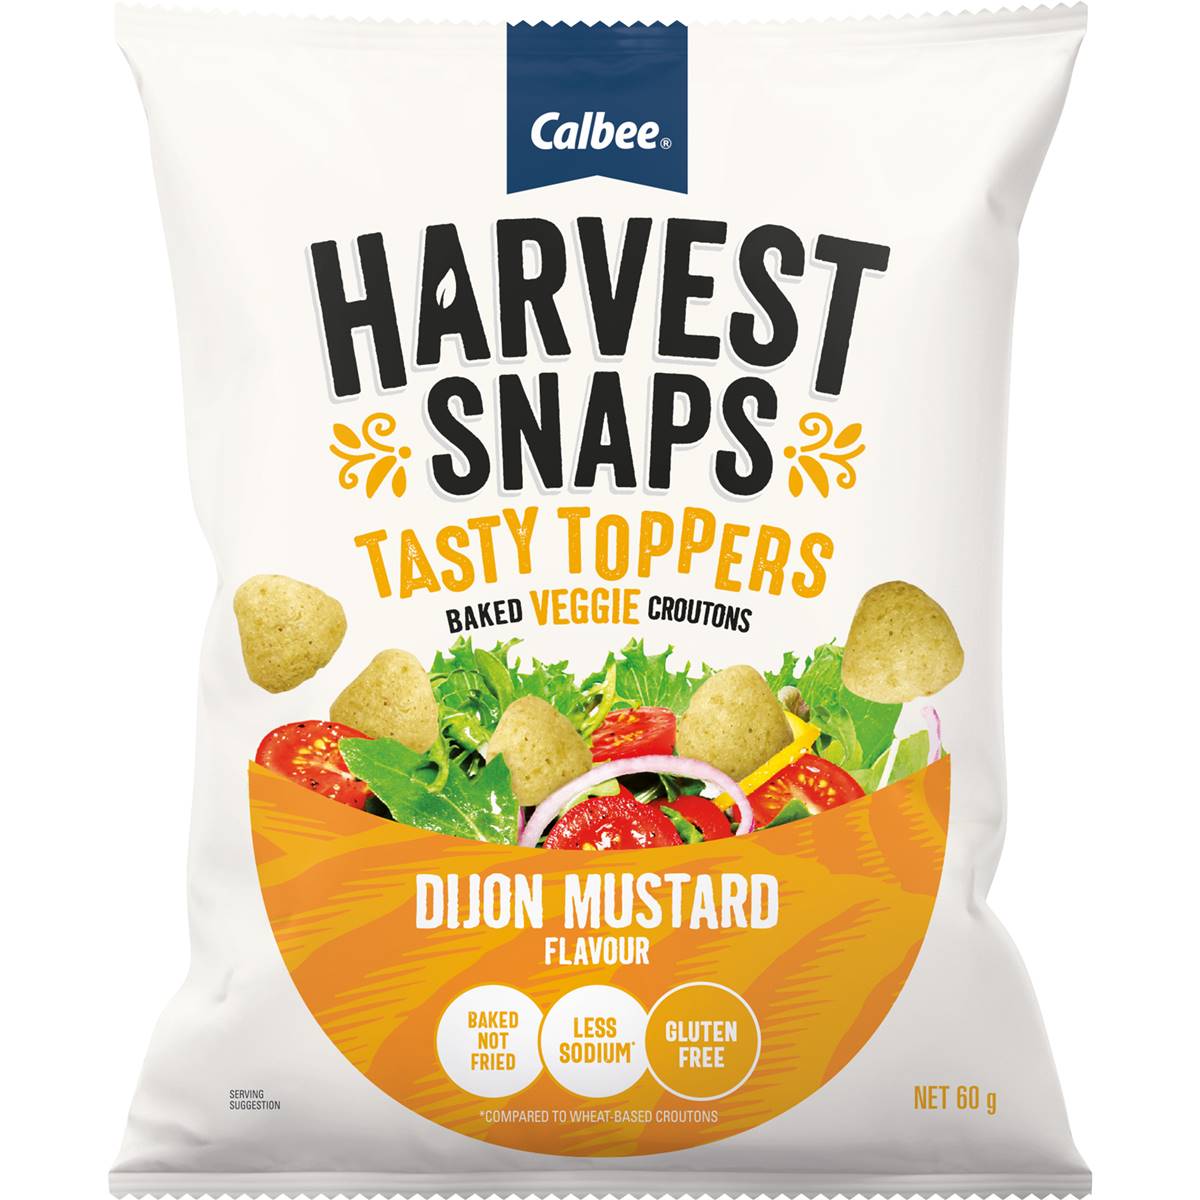 Calories in Calbee Harvest Snaps Tasty Toppers Dijon Flavour